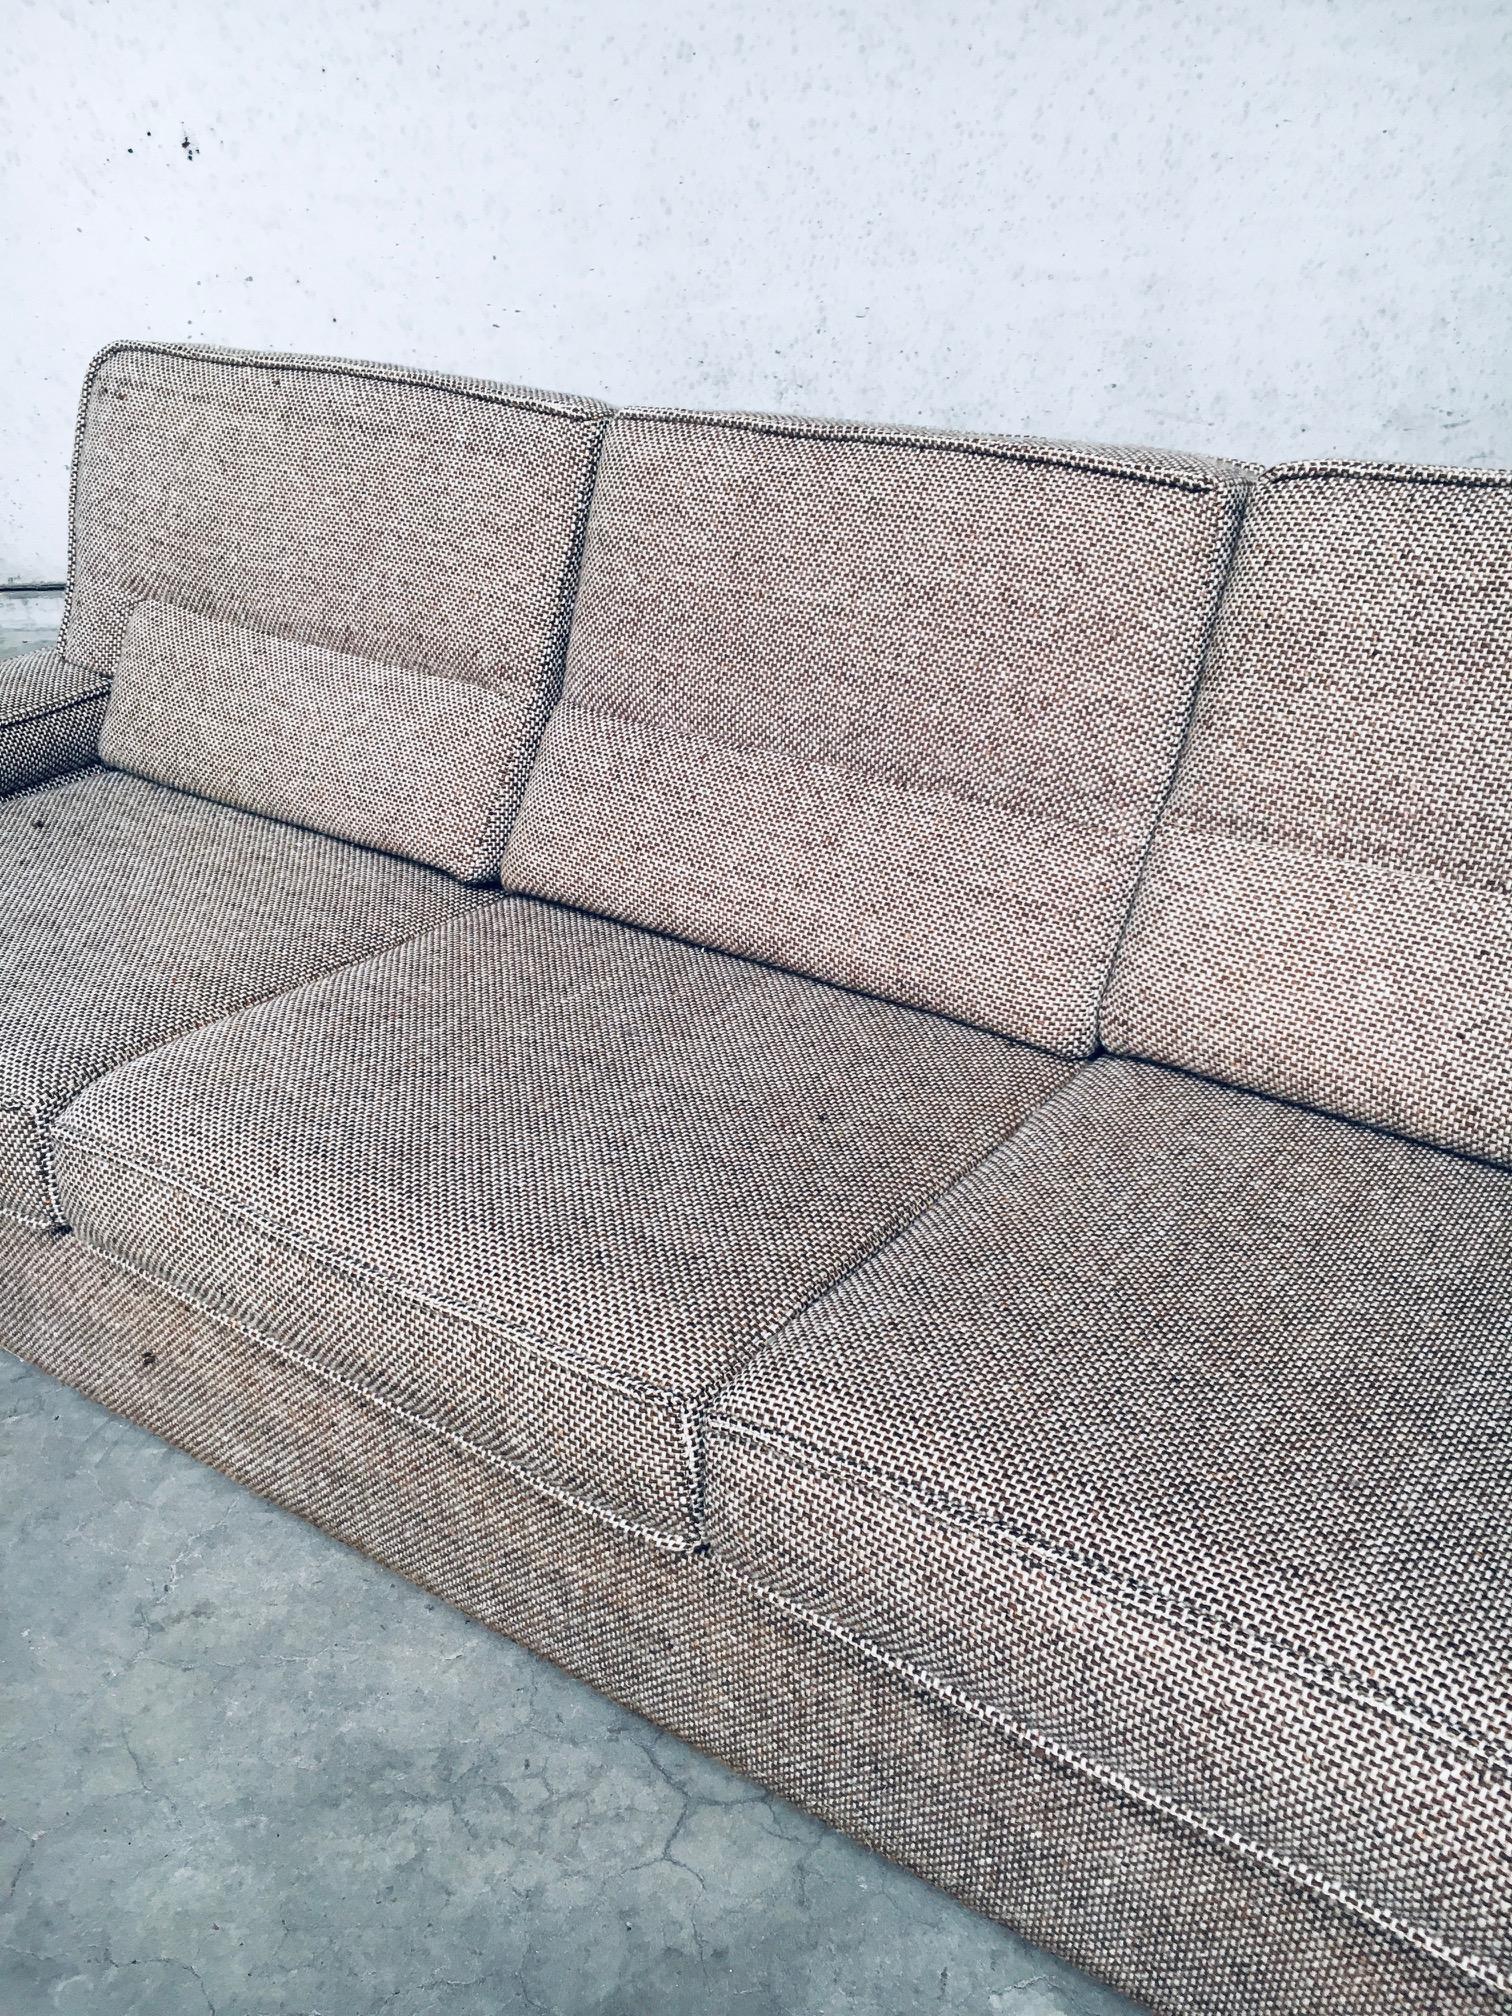 Midcentury Modern Design Boucle 3 Seat Sofa, Italy 1970's For Sale 3